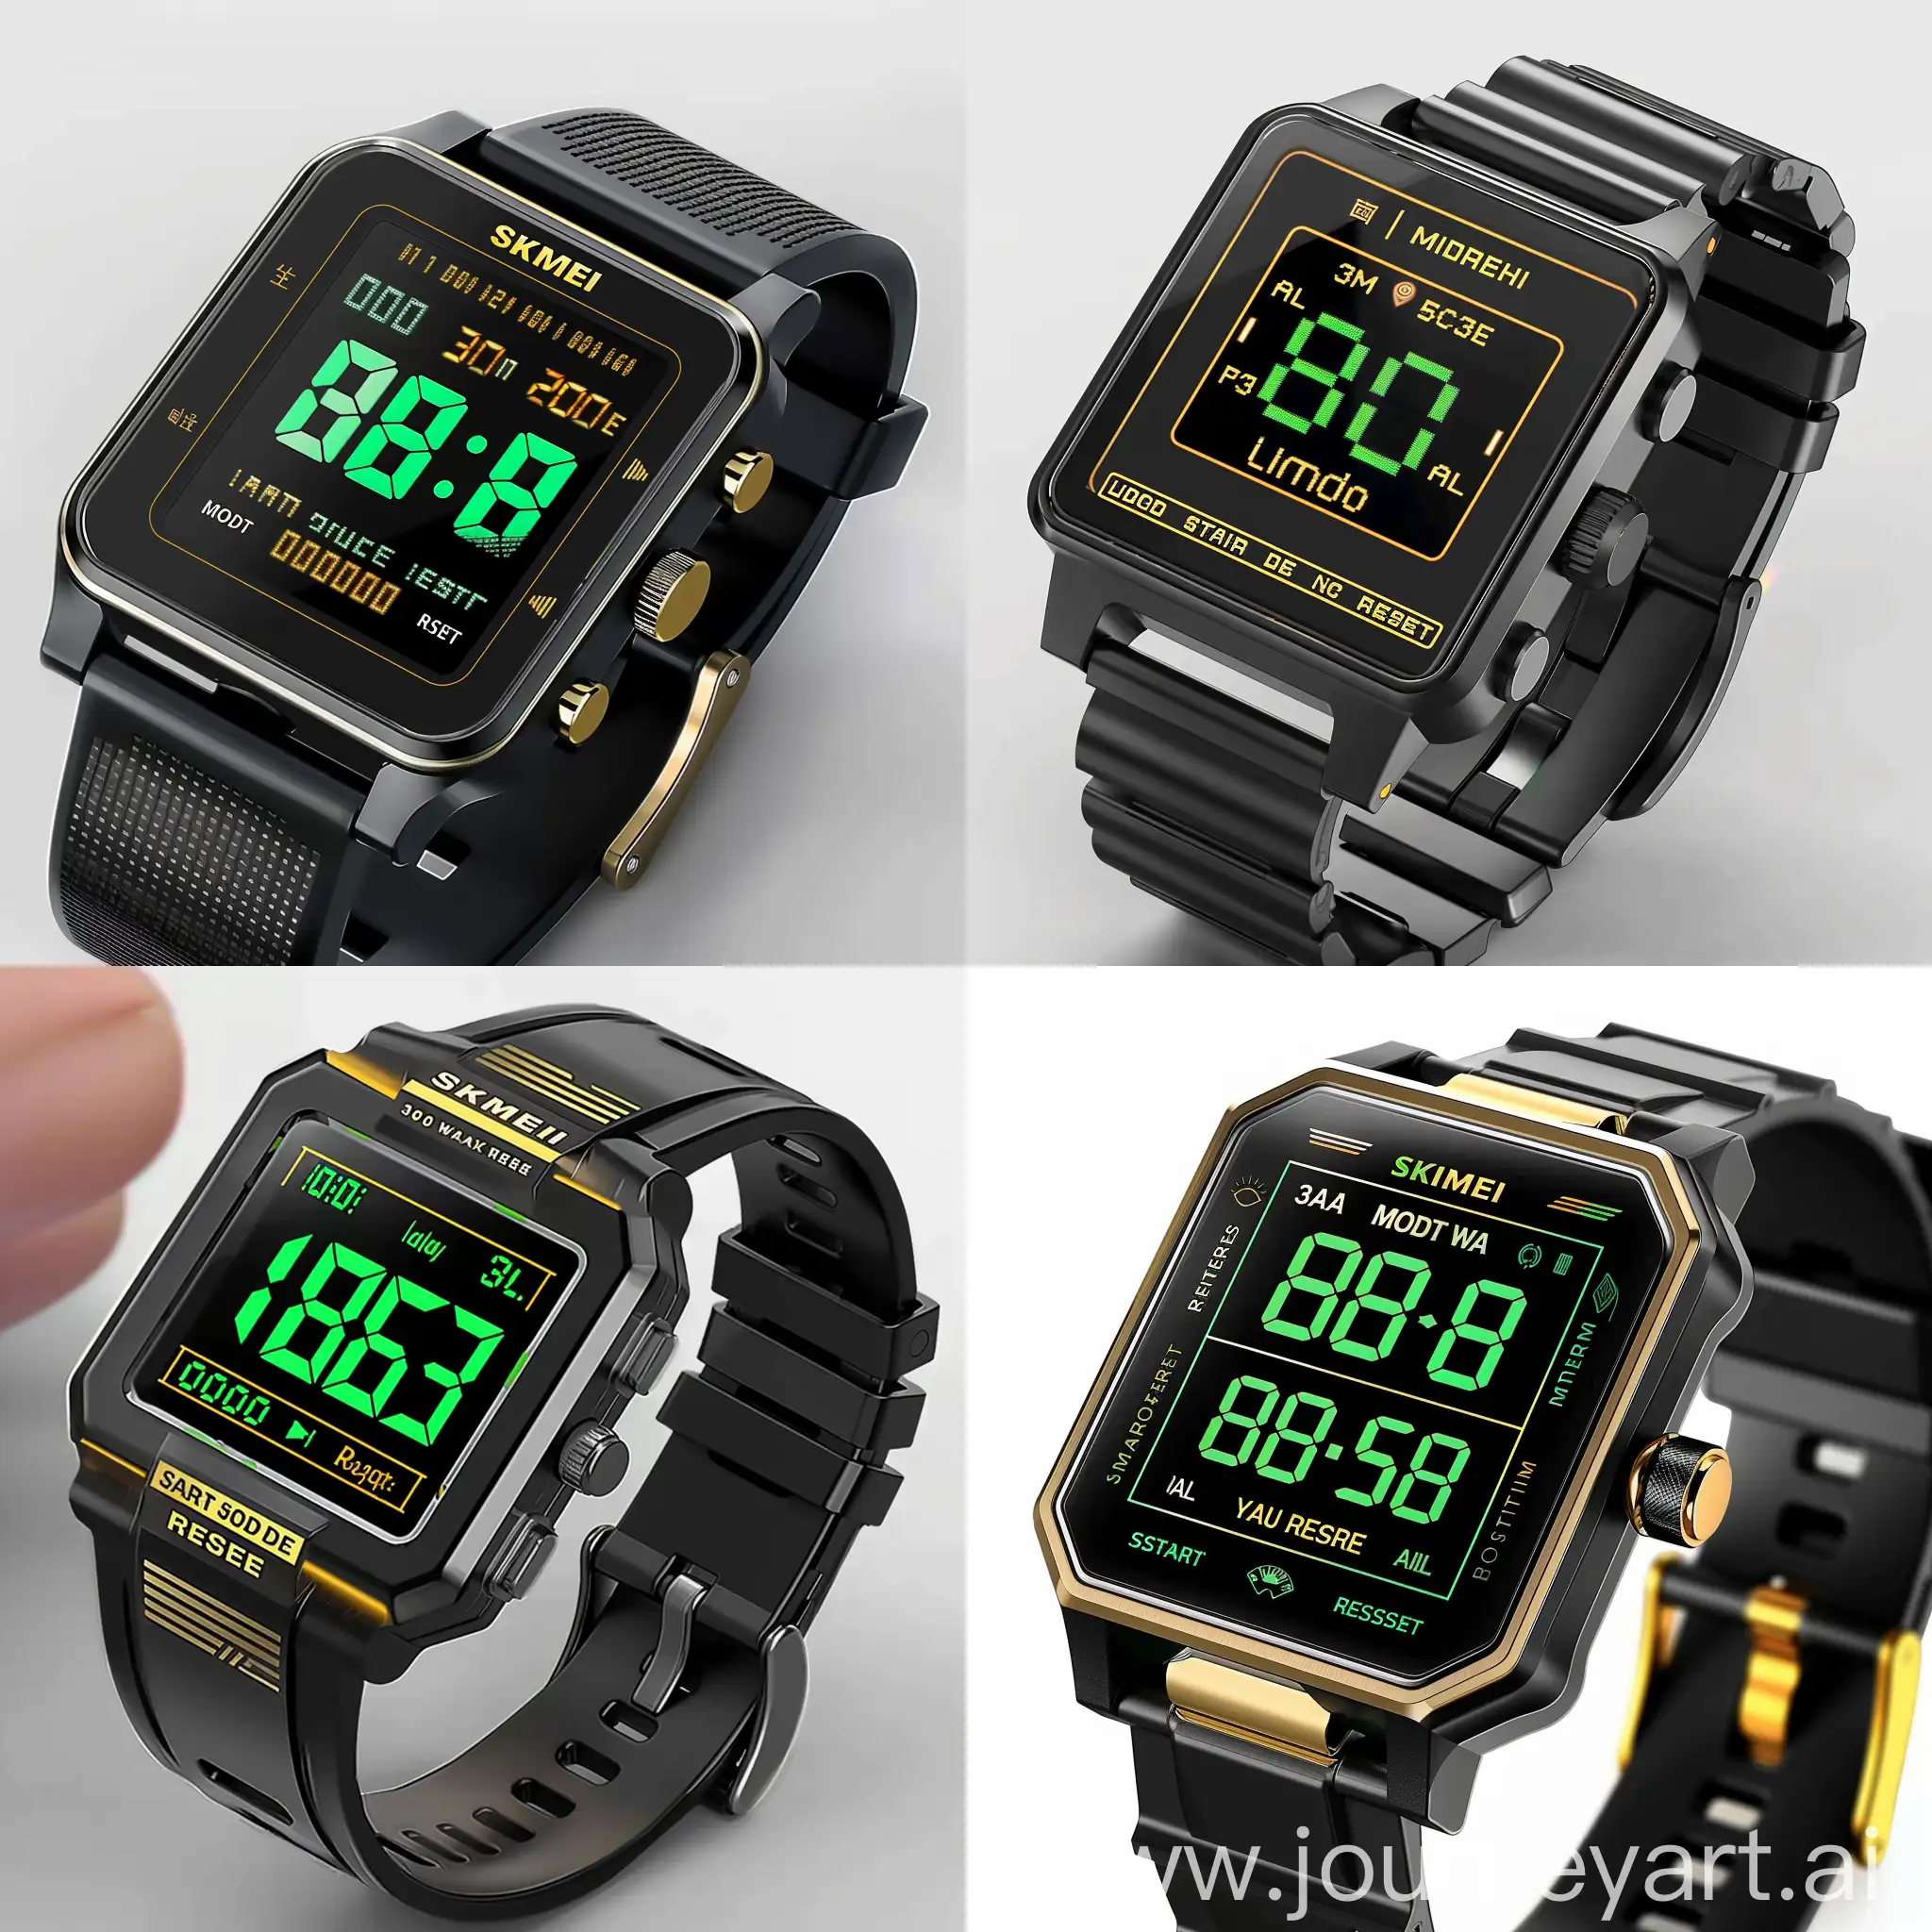 Generate an image of a digital wristwatch with the following features:

1. **Watch Brand and Model:**
   - The brand "SKMEI" displayed prominently at the top of the watch face in gold text.

2. **Watch Face:**
   - The display should be rectangular with rounded edges, featuring a black background.
   - The main digital display should show the current time in large green numbers ("10:50").
   - The top left of the watch face should show the day ("SA") and the date ("10-20").
   - The top right corner should display a small battery icon and "36" seconds in green.
   - The letter "P" should be shown on the left side of the time, indicating PM.
   - Below the time, there should be a small "AL" icon indicating the alarm function.

3. **Watch Text and Icons:**
   - The words "30M WATER RESIST" should be printed at the bottom of the watch face in gold text.
   - On the left side of the watch face, there should be the words "MODE" and "LIGHT" in gold.
   - On the right side of the watch face, there should be the words "START" and "RESET" in gold.

4. **Watch Buttons:**
   - The watch should have four buttons on the sides, two on each side, with a metallic finish.
   - The buttons should be placed in the following order from top to bottom:
     - Left side: "MODE" and "LIGHT"
     - Right side: "START" and "RESET"

5. **Watch Case:**
   - The watch case should be metallic, with a brushed steel finish.
   - The case should have a solid, durable appearance with a slightly angular design around the display.

6. **Watch Strap:**
   - The strap should be black and made of a textured rubber material.
   - The strap should be adjustable with a buckle clasp.

7. **Background:**
   - The background of the image should be plain white to allow easy removal or editing later.

The image should capture the watch from a slightly angled front view, showcasing the details of the watch face, case, buttons, and strap clearly. --v 6 --s 0 --style raw 